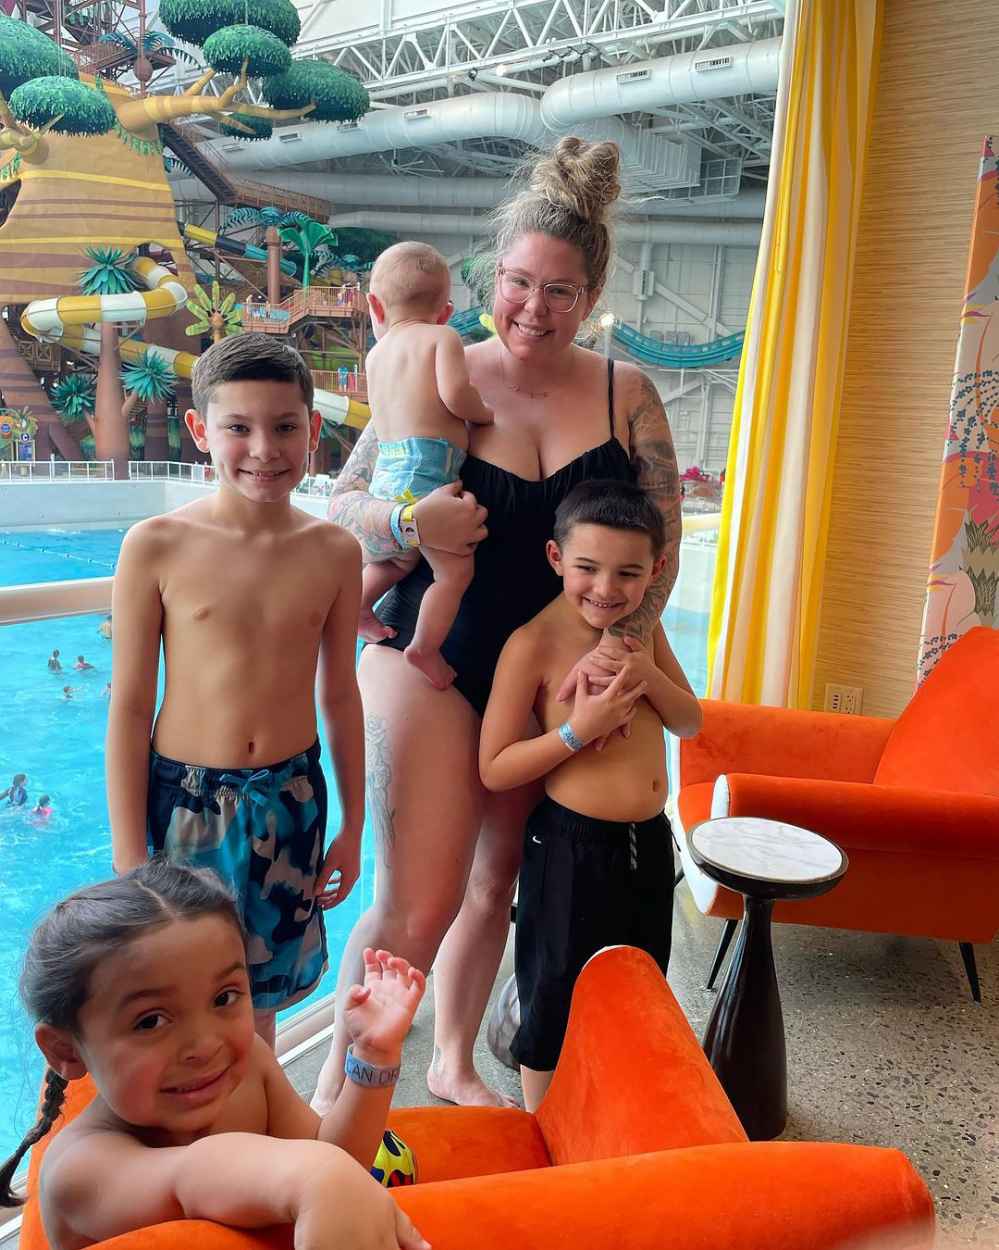 Kailyn Lowry’s Kids ‘Don’t Get’ Her Reality TV Fame, Have ‘Never' Watched a Full ‘Teen Mom 2’ Episode